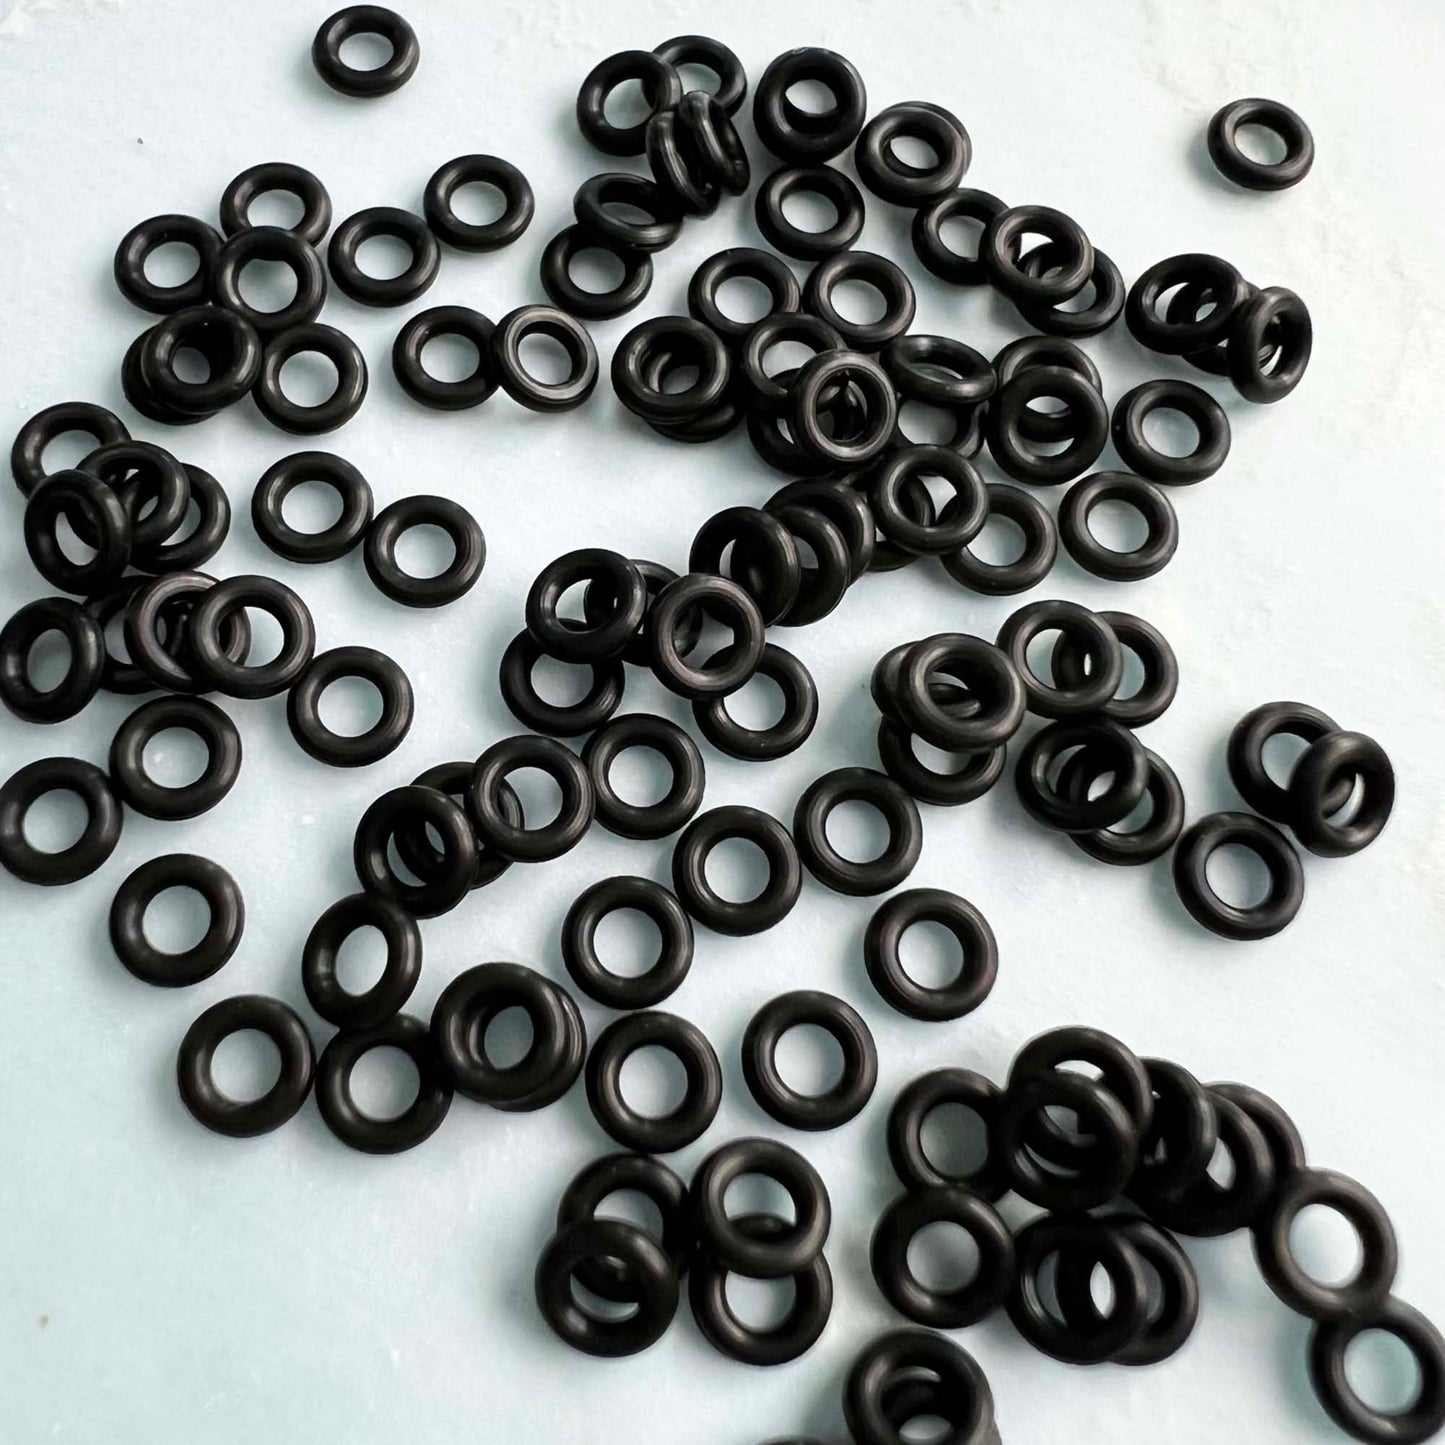 6.5mm Rubber O-Rings (ID: 3.5mm) - choose color